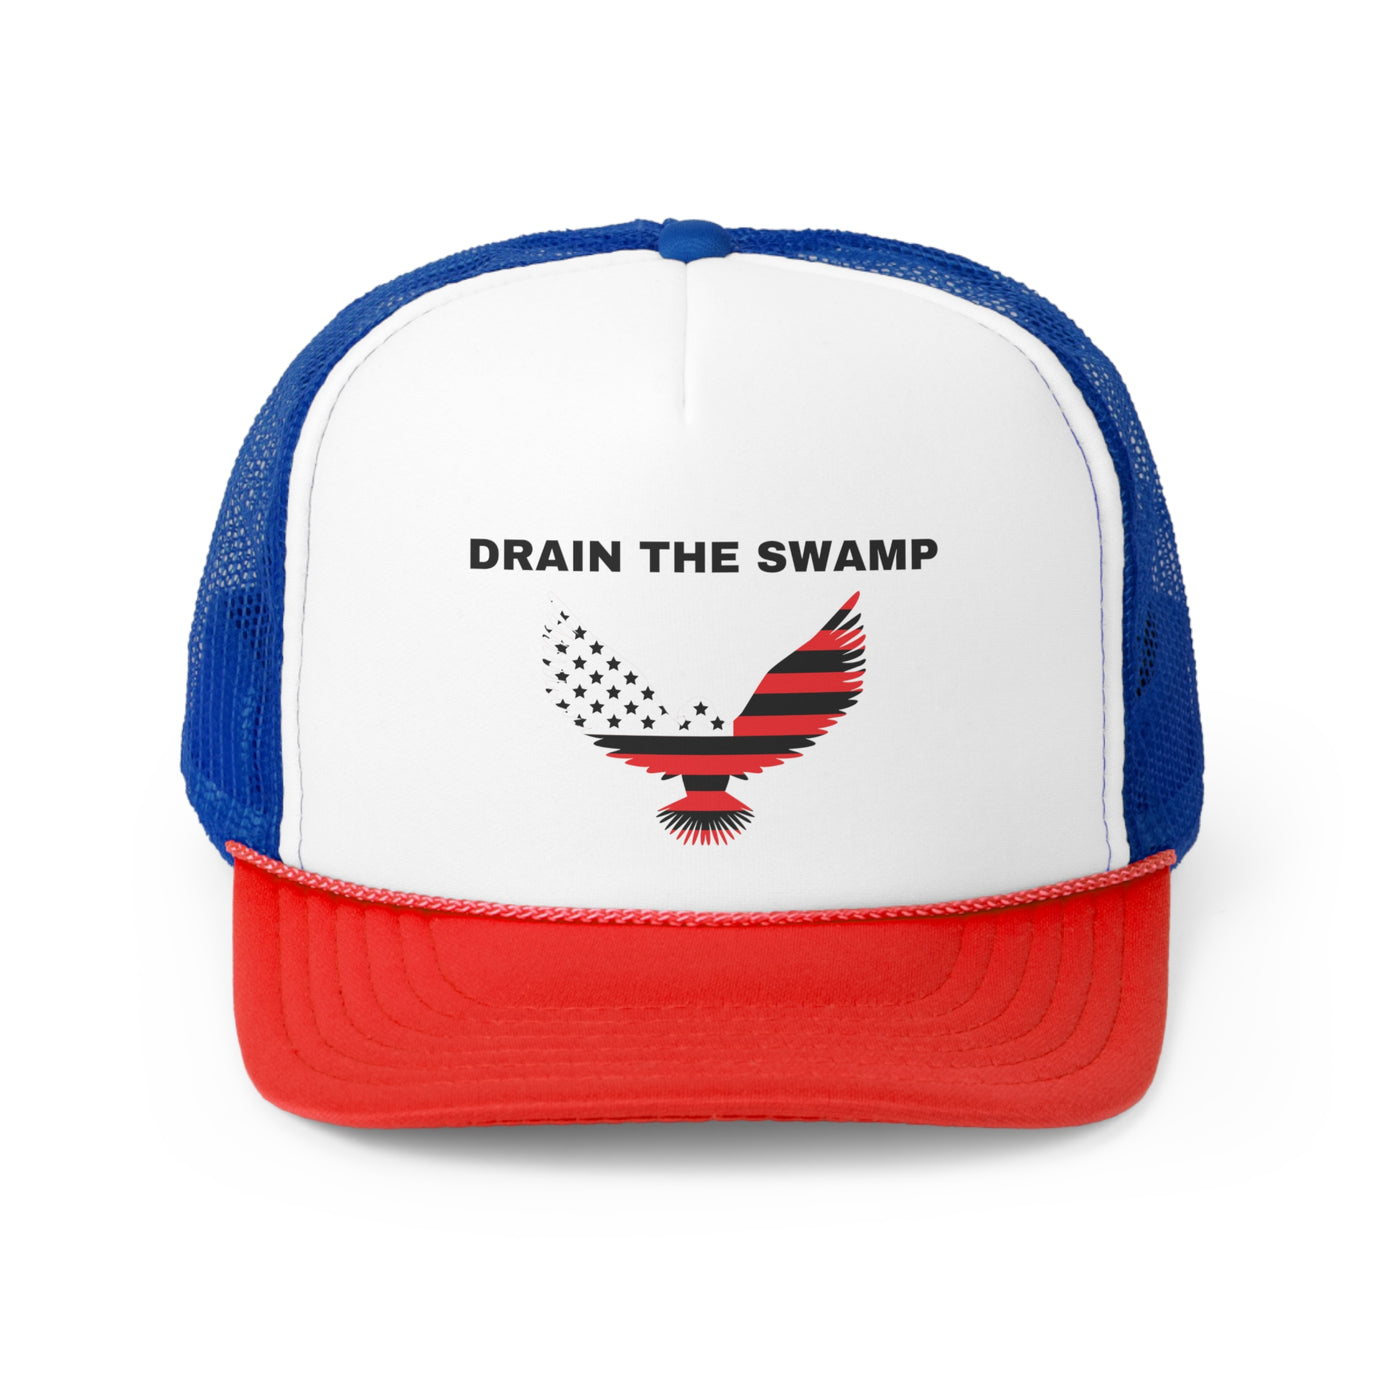 DRAIN THE SWAMP PATRIOTIC HAT - Freedom First Supply